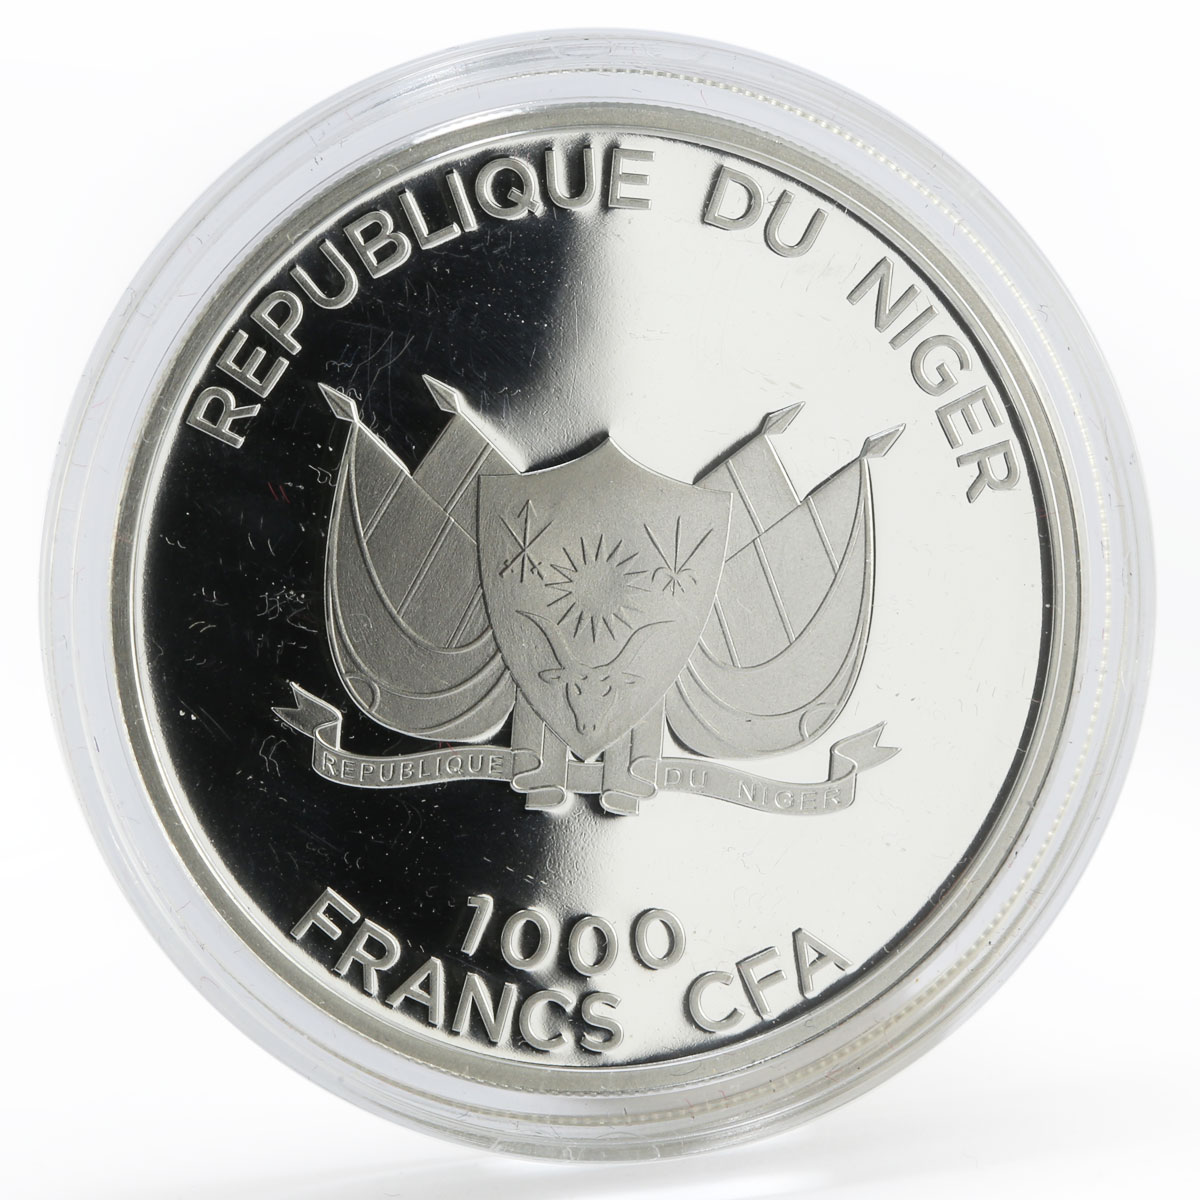 Niger 1000 francs Holy Quran colored proof silver coin 2012